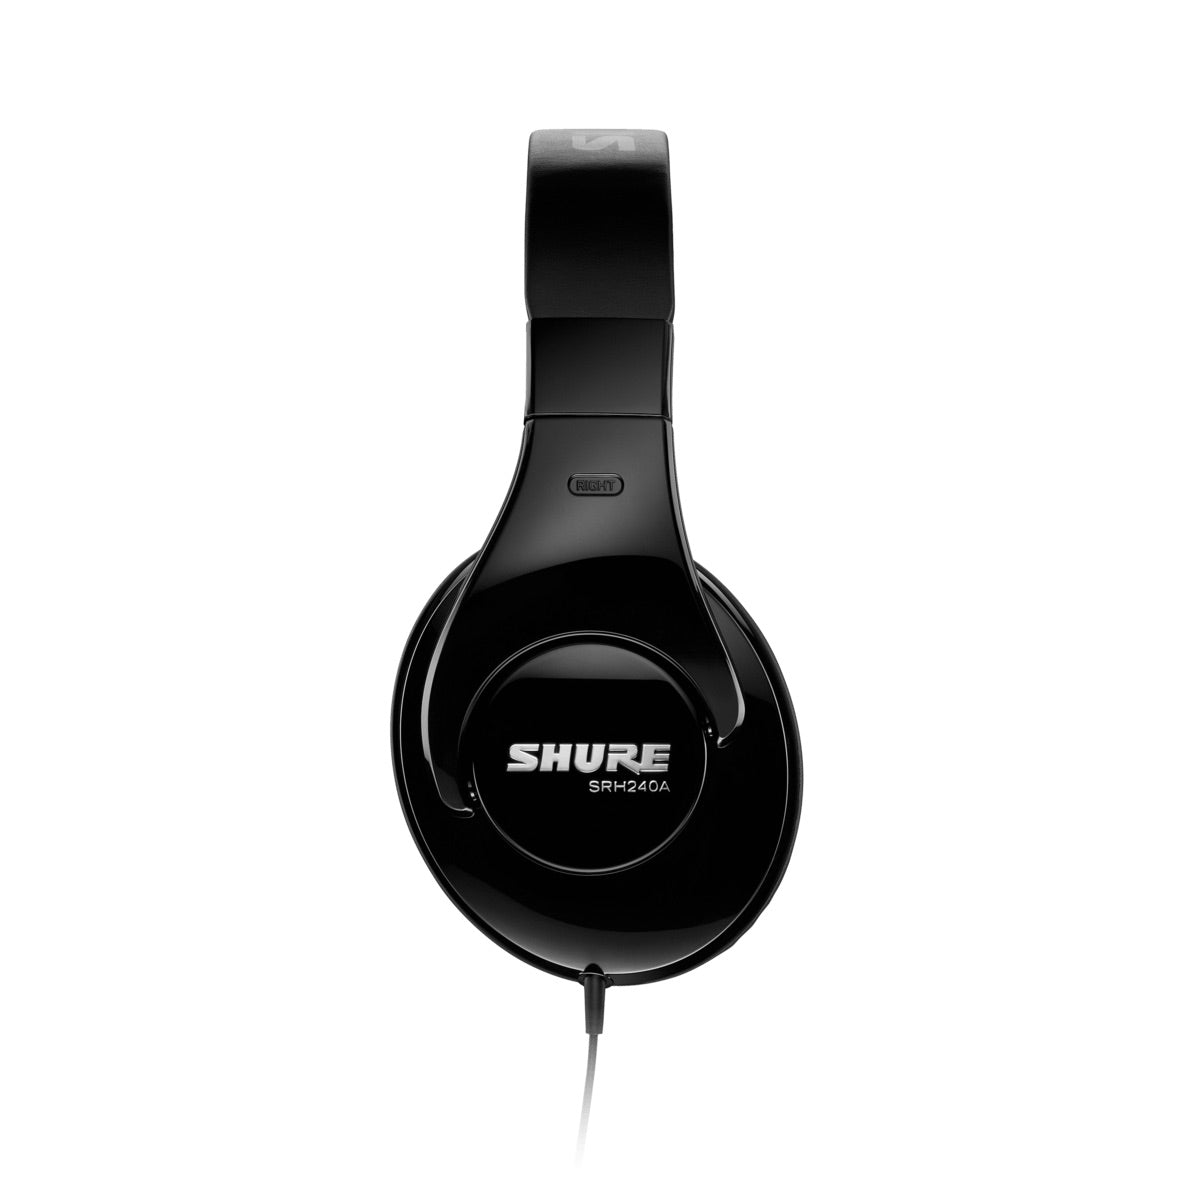 Shure SRH240A - Professional Quality Headphones, right side